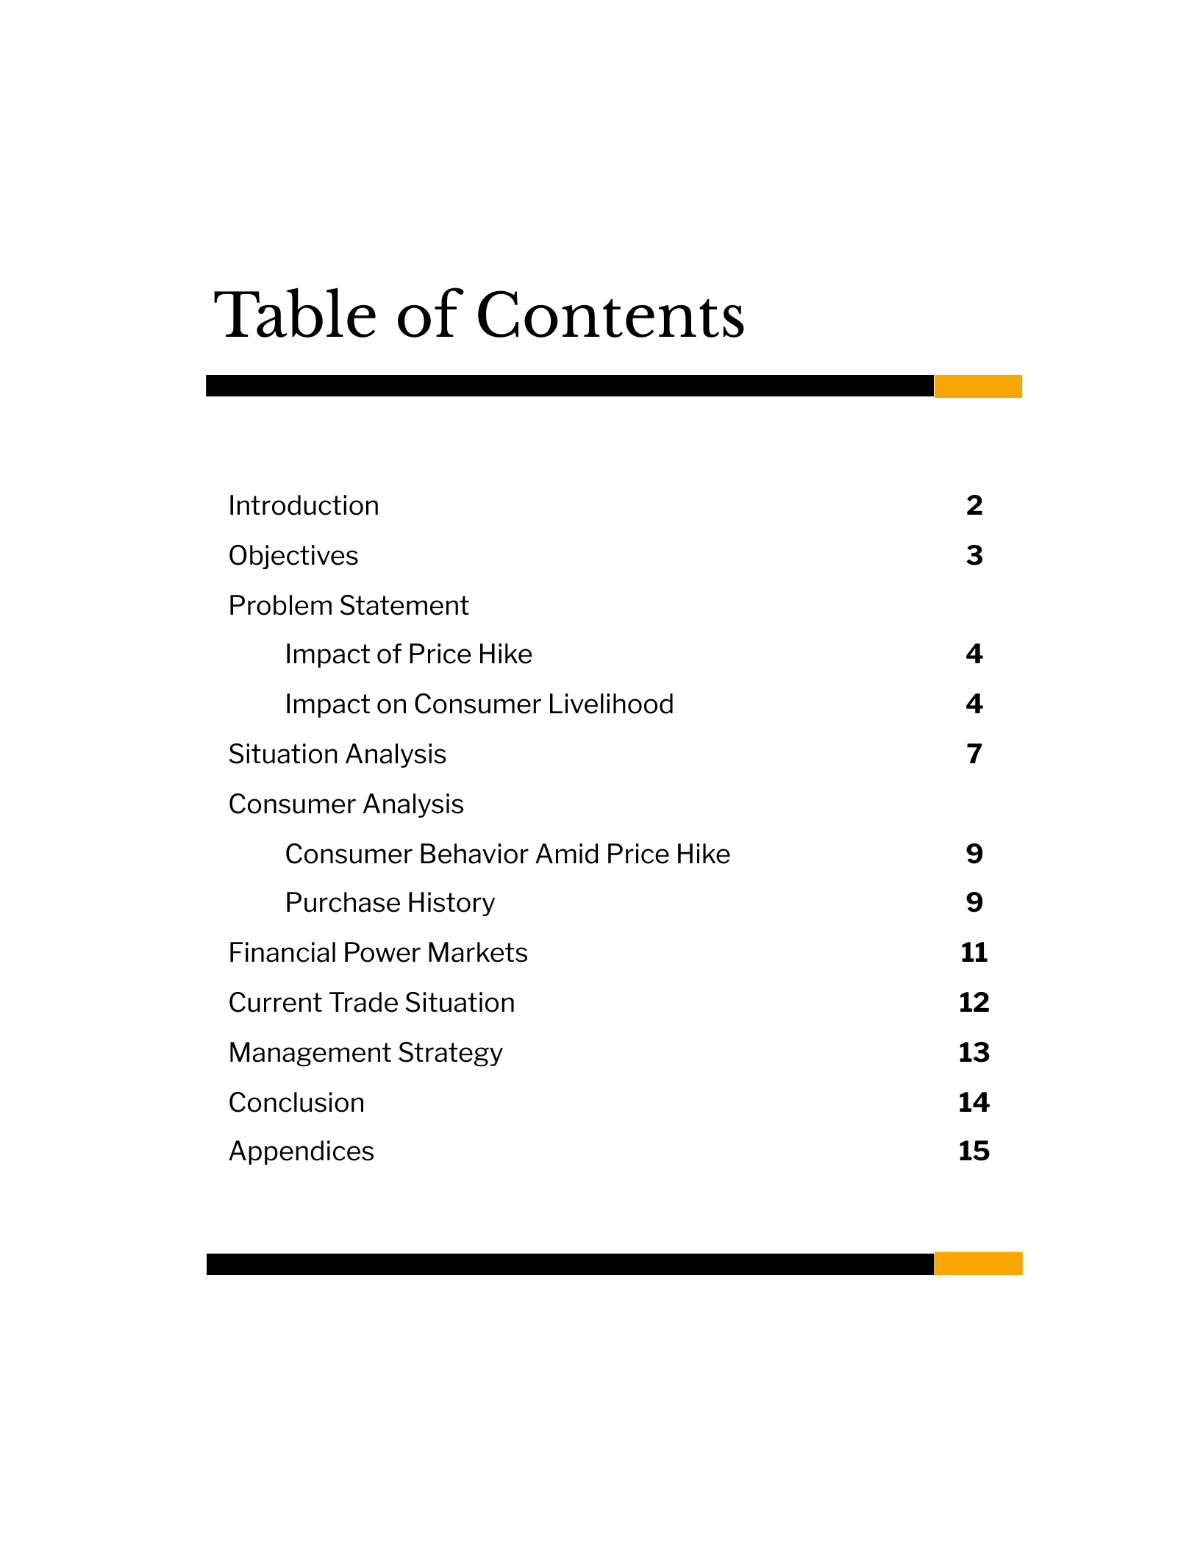 Table of Contents For White Papers Template